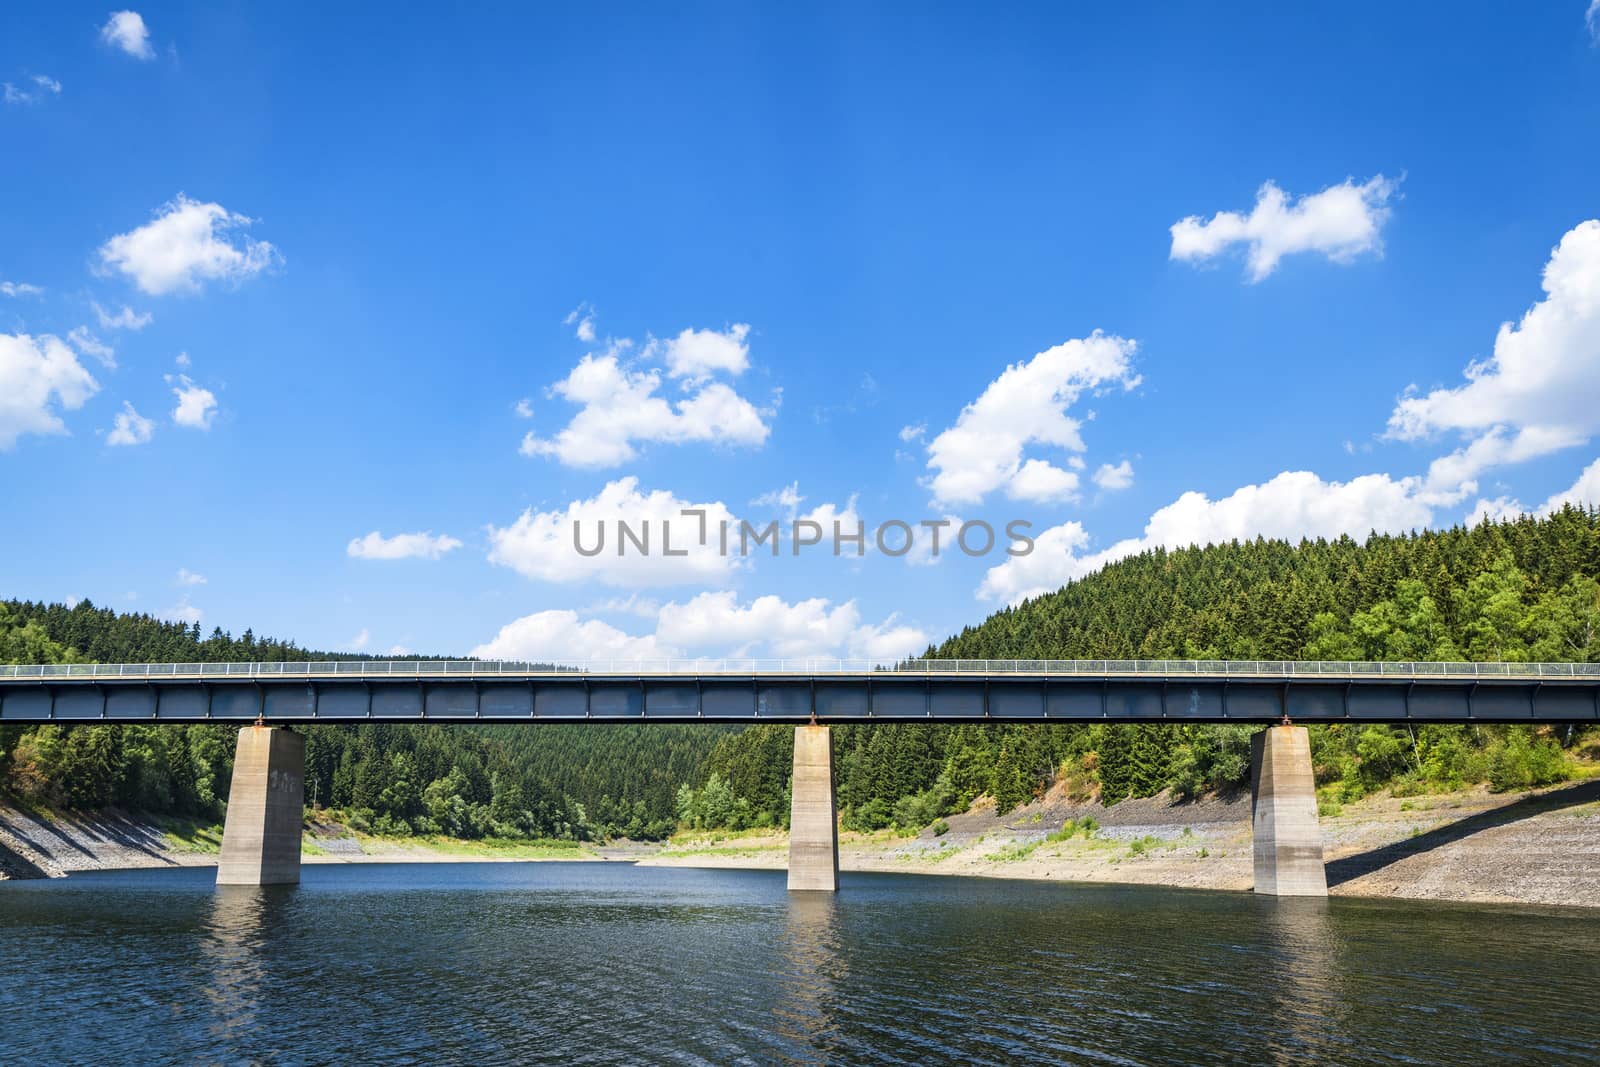 Large bridge over a lake near a forest in the summertime with blue sky